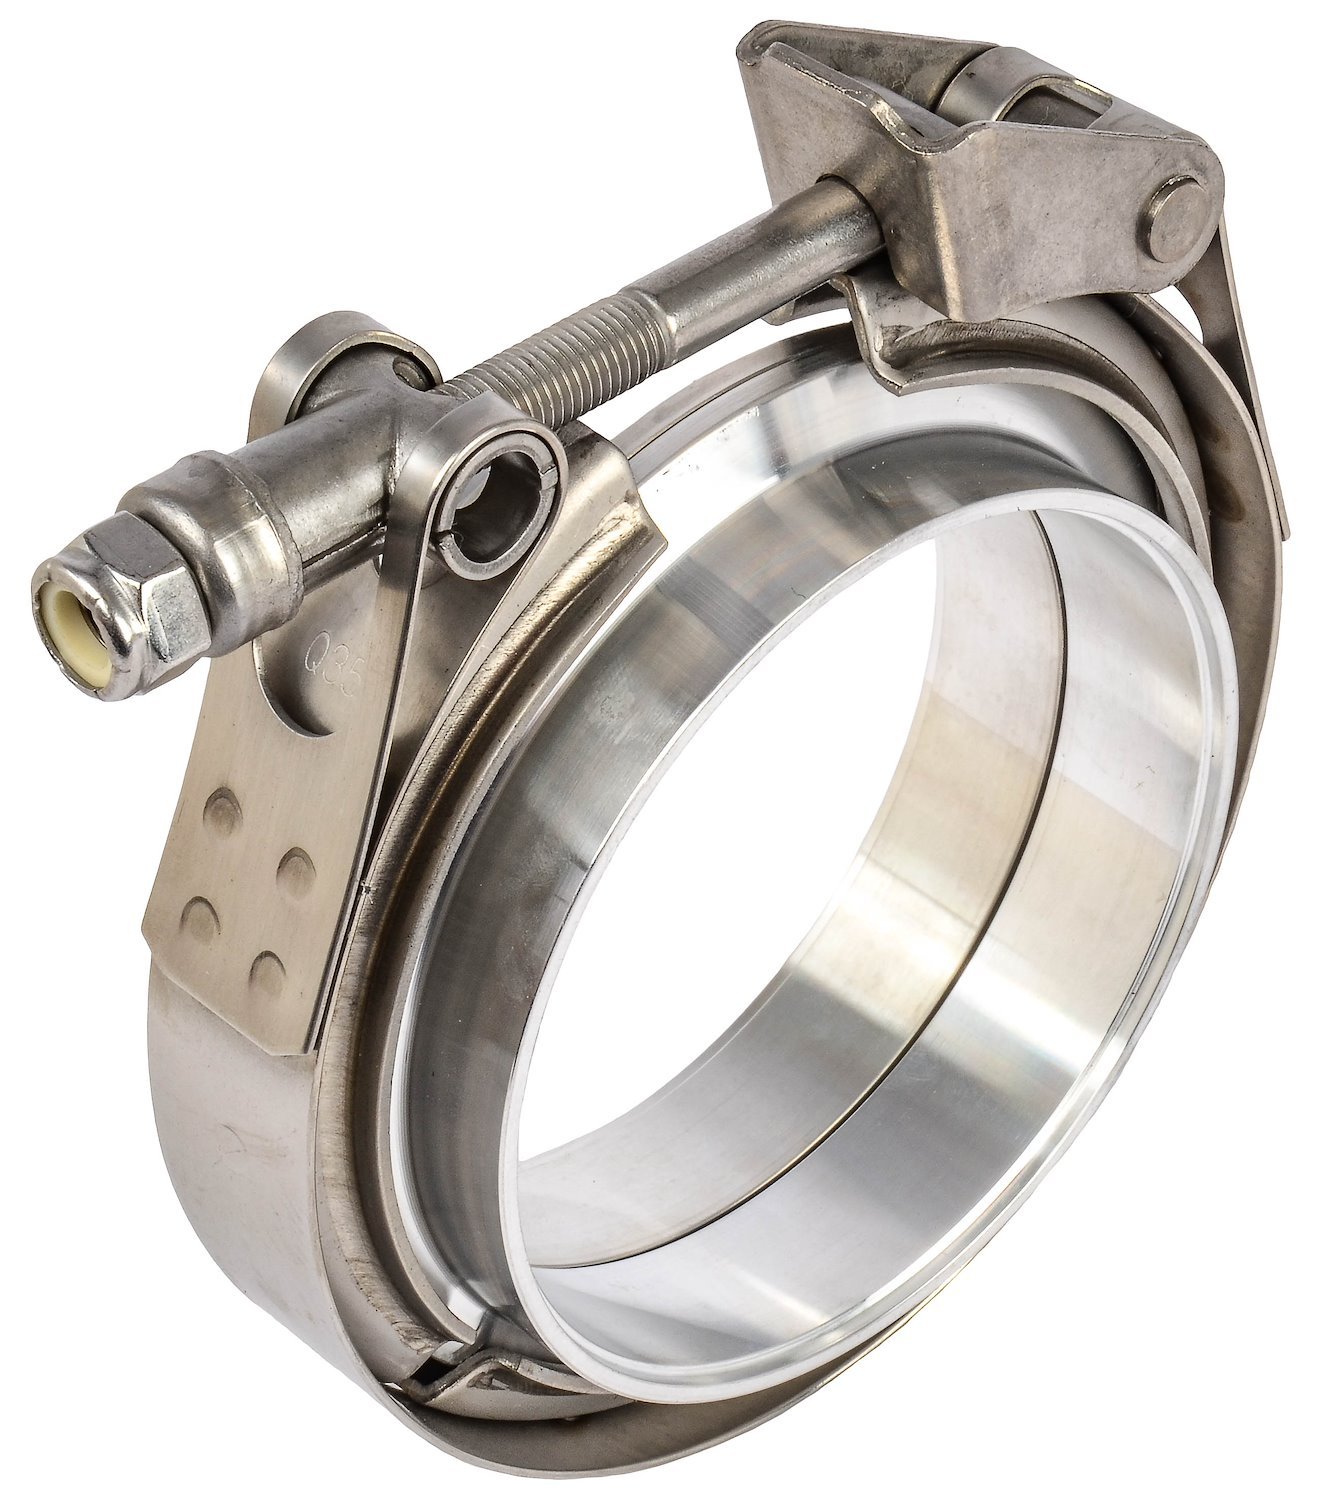 Stainless Steel Quick Release V-Band Clamp & Aluminum